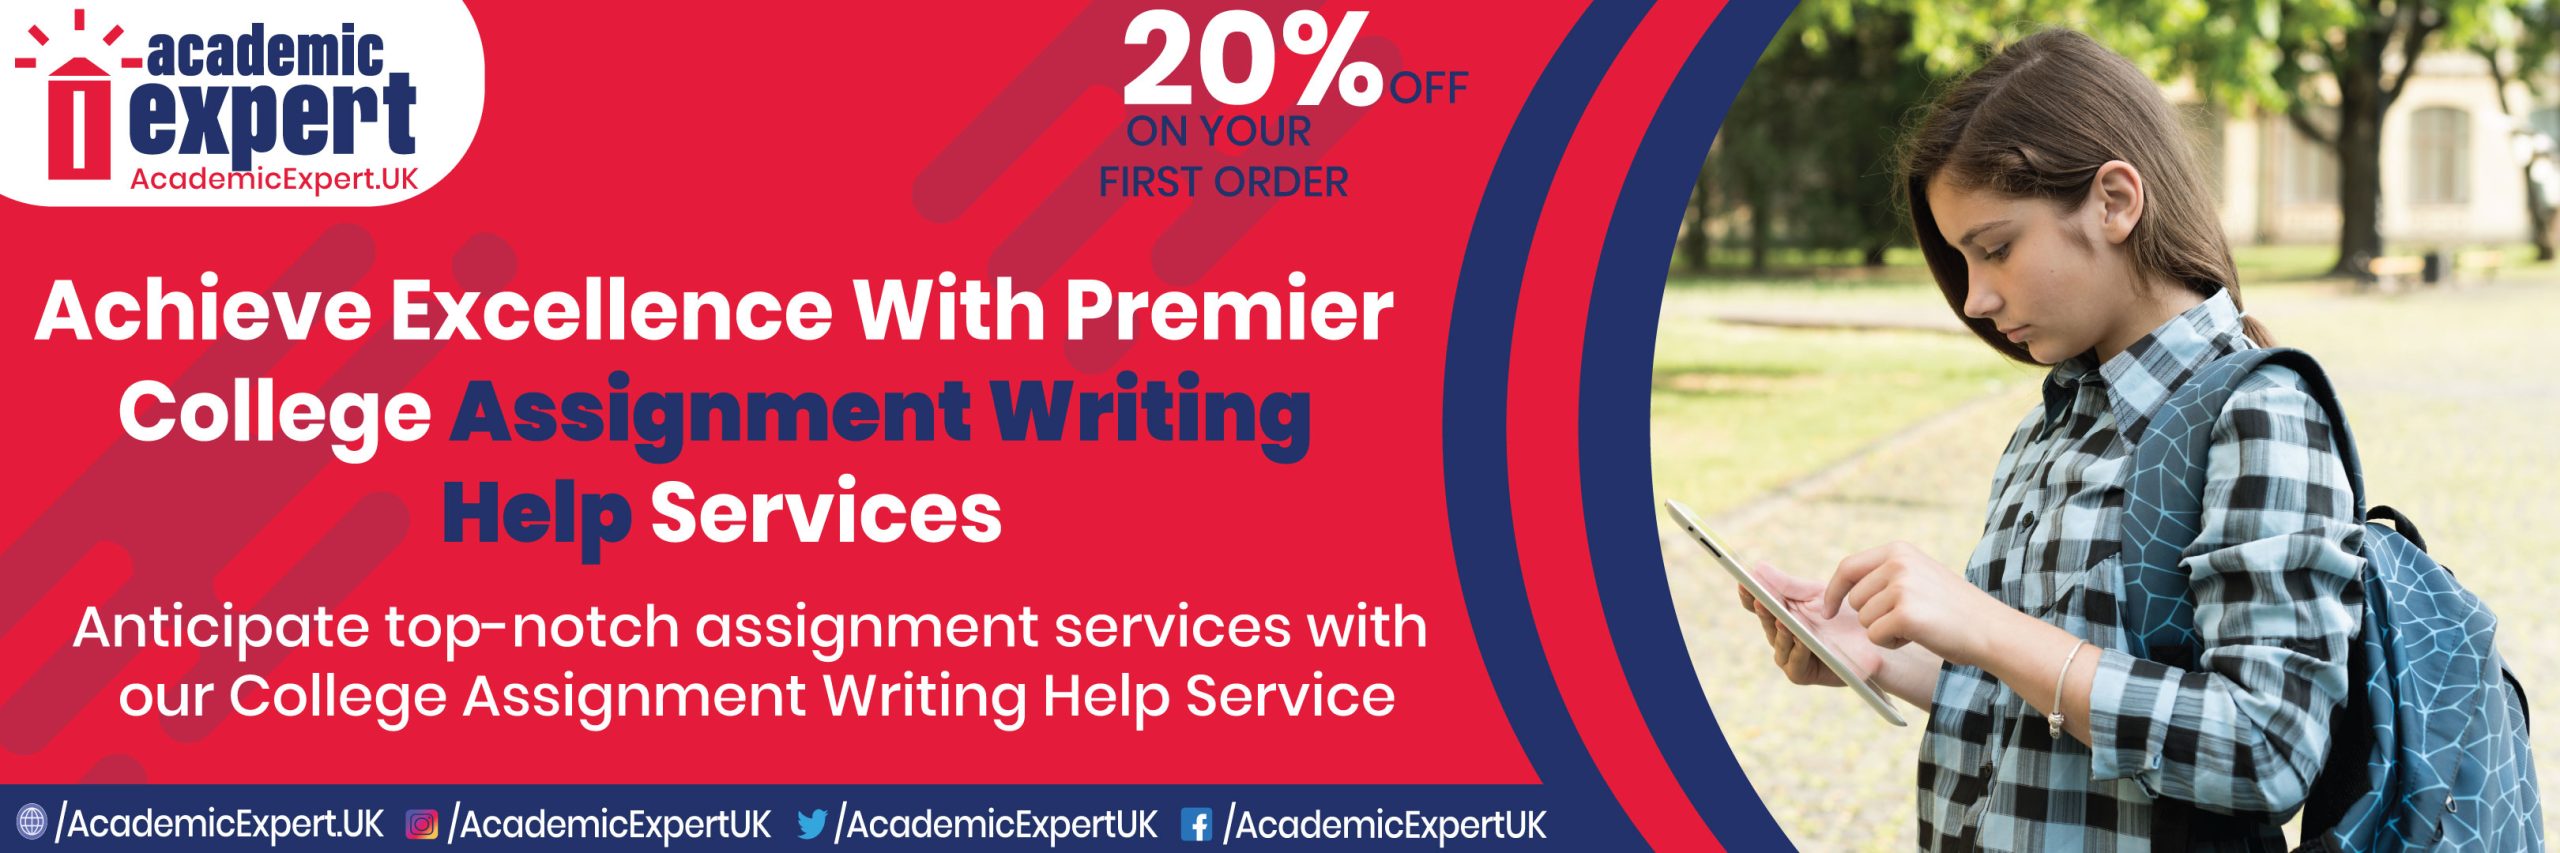 ACHIEVE EXCELLENCE WITH PREMIER COLLEGE ASSIGNMENT WRITING HELP SERVICES!